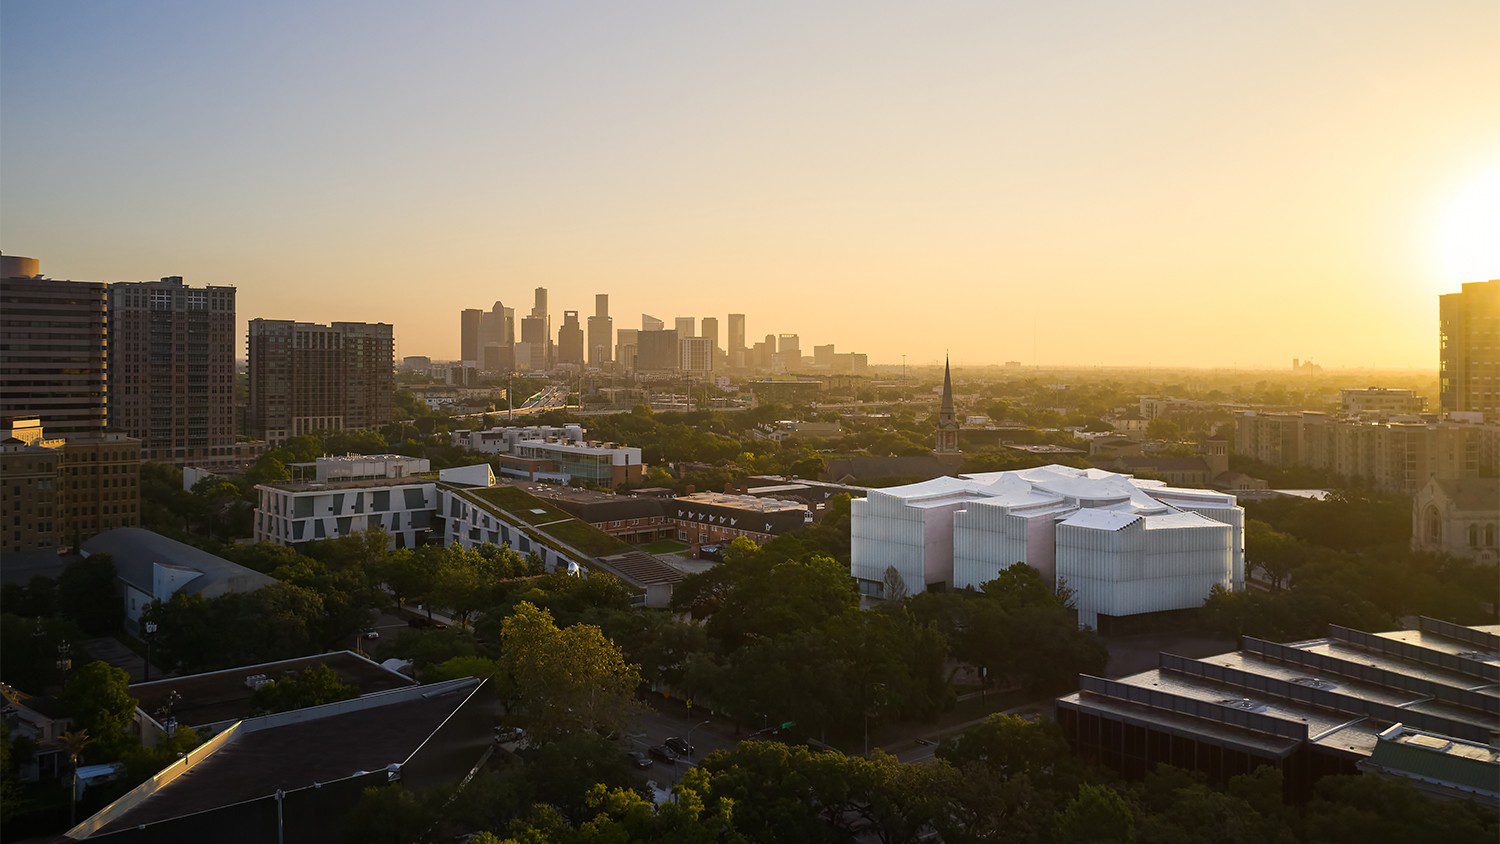 MUSEUM OF FINE ARTS HOUSTON CAMPUS EXPANSION (MFAH)